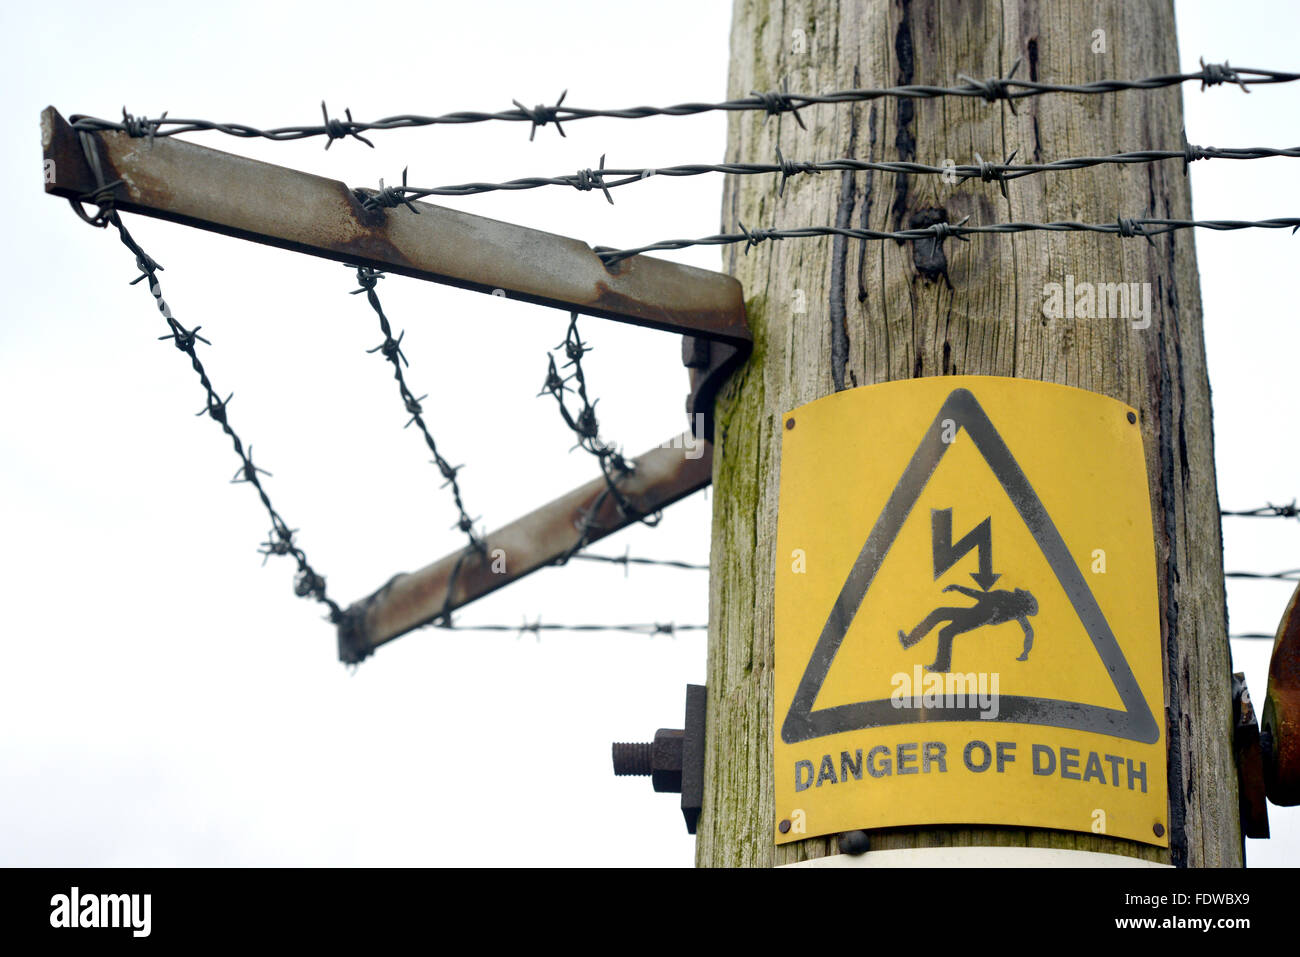 Danger of death sign on electricity pole Stock Photo